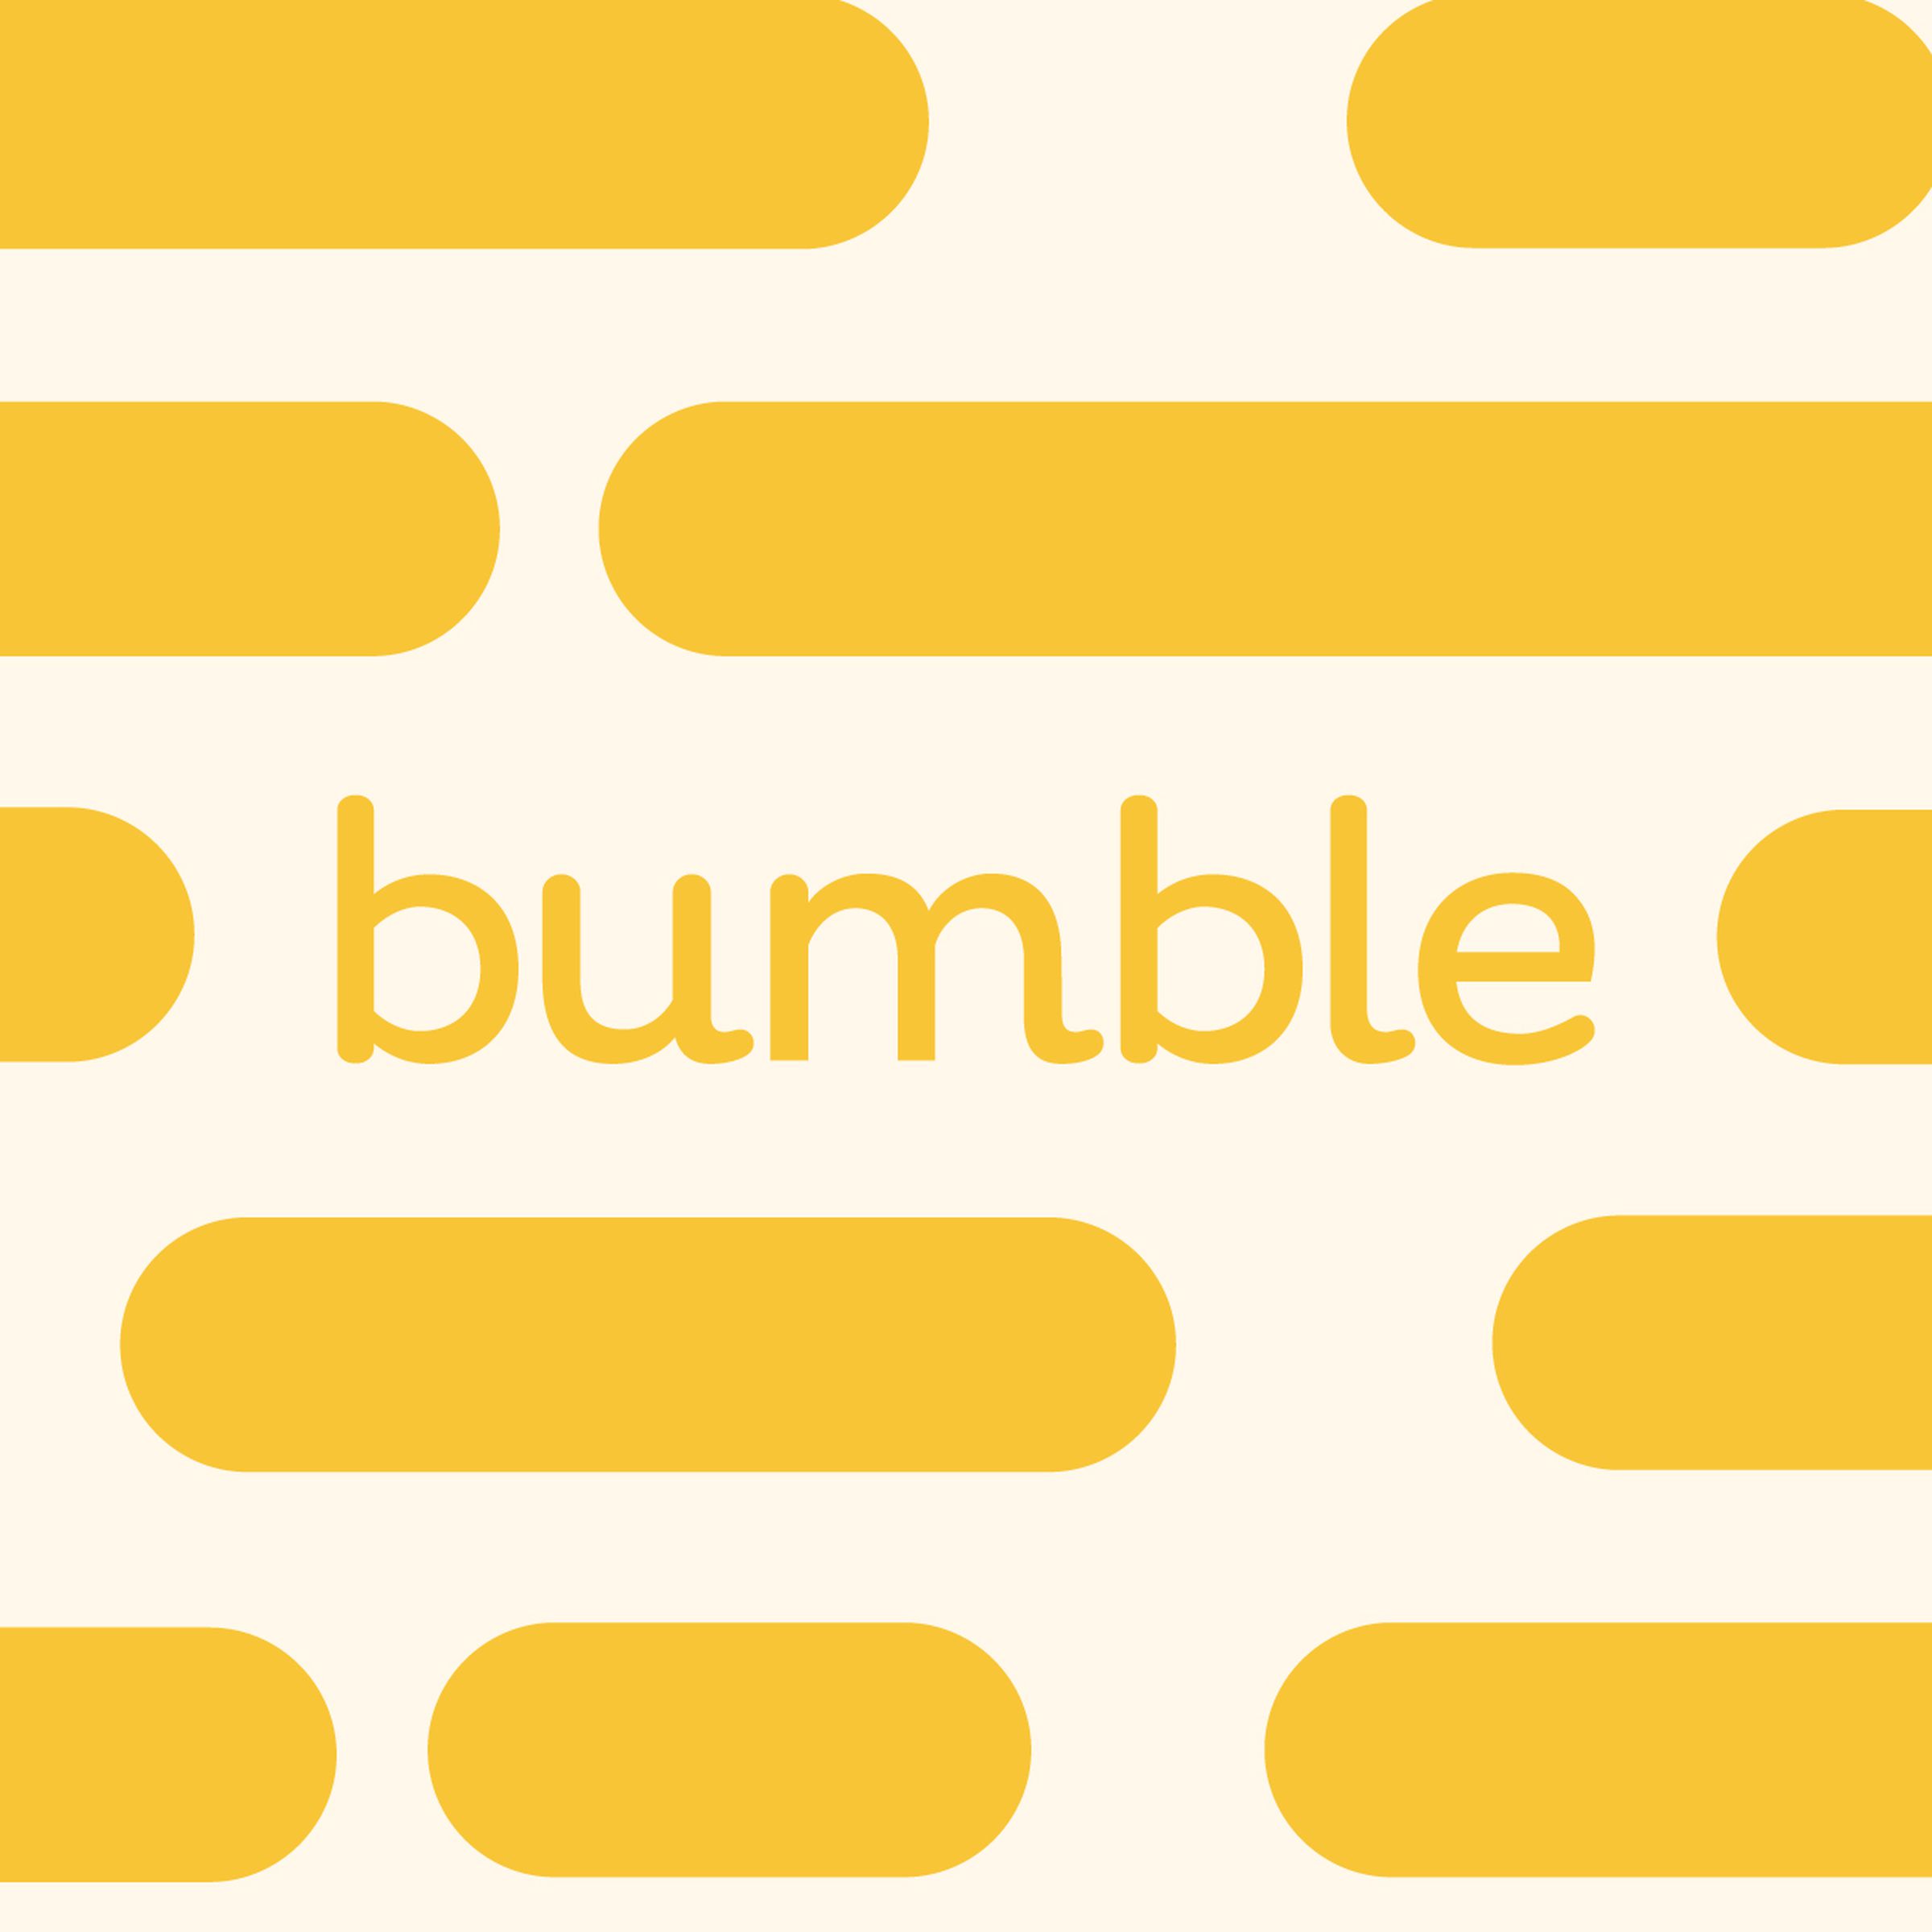 An illustration of the Bumble logo.